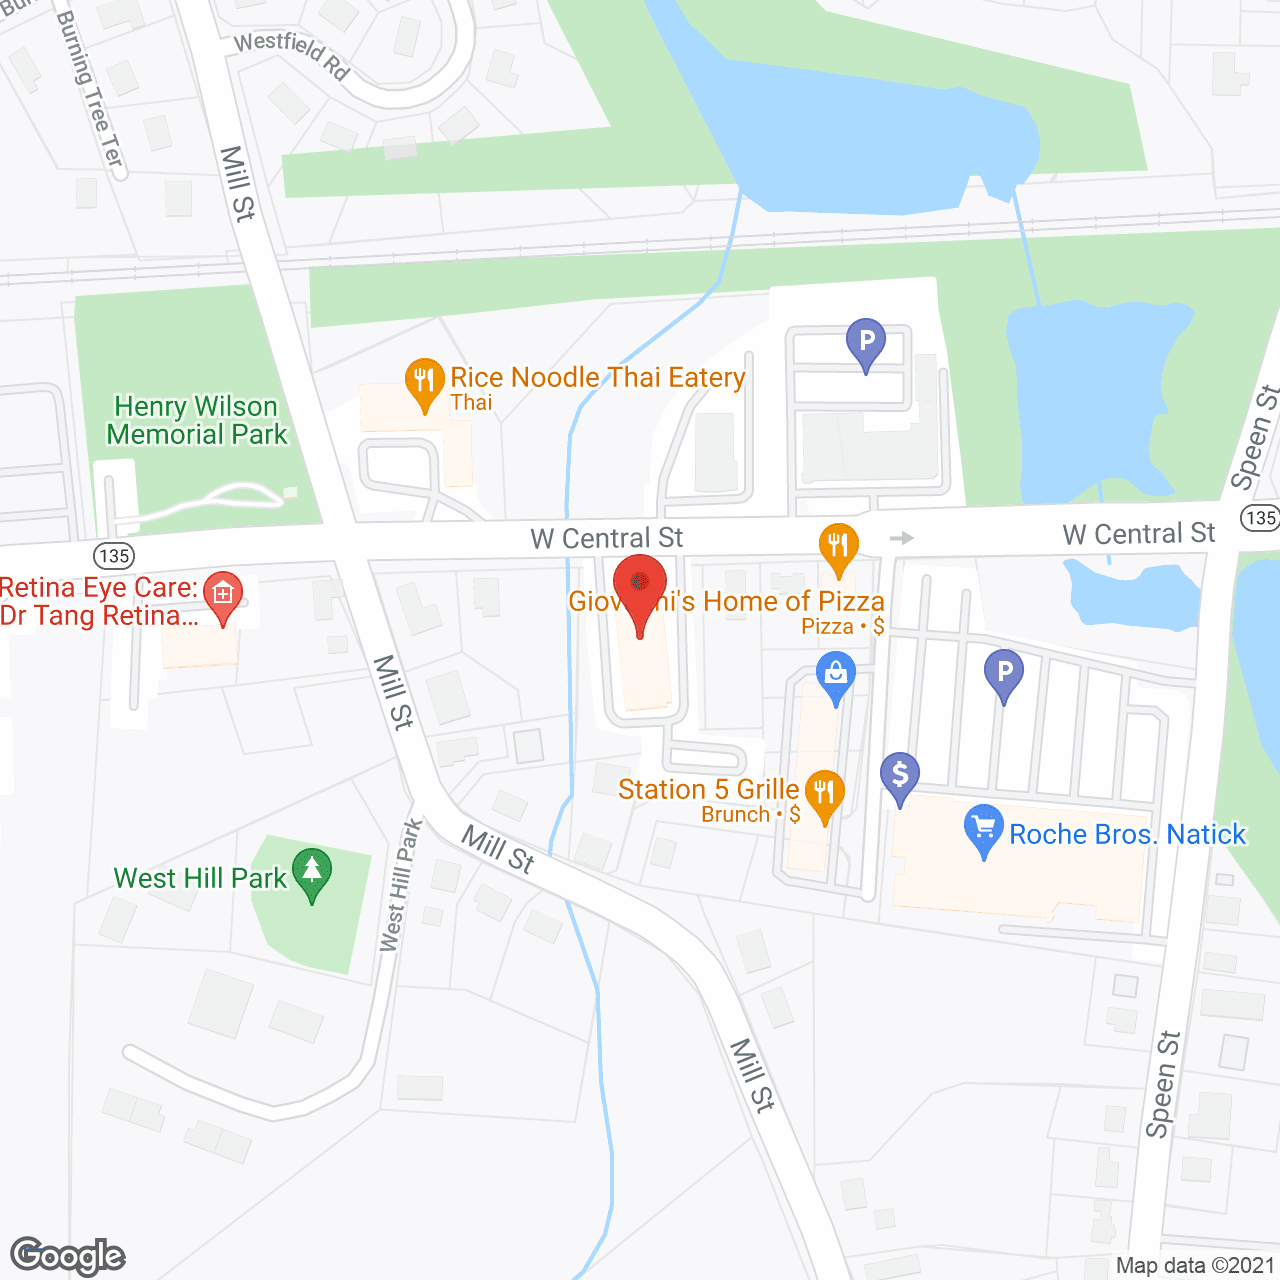 The Eliot Healthcare Center in google map